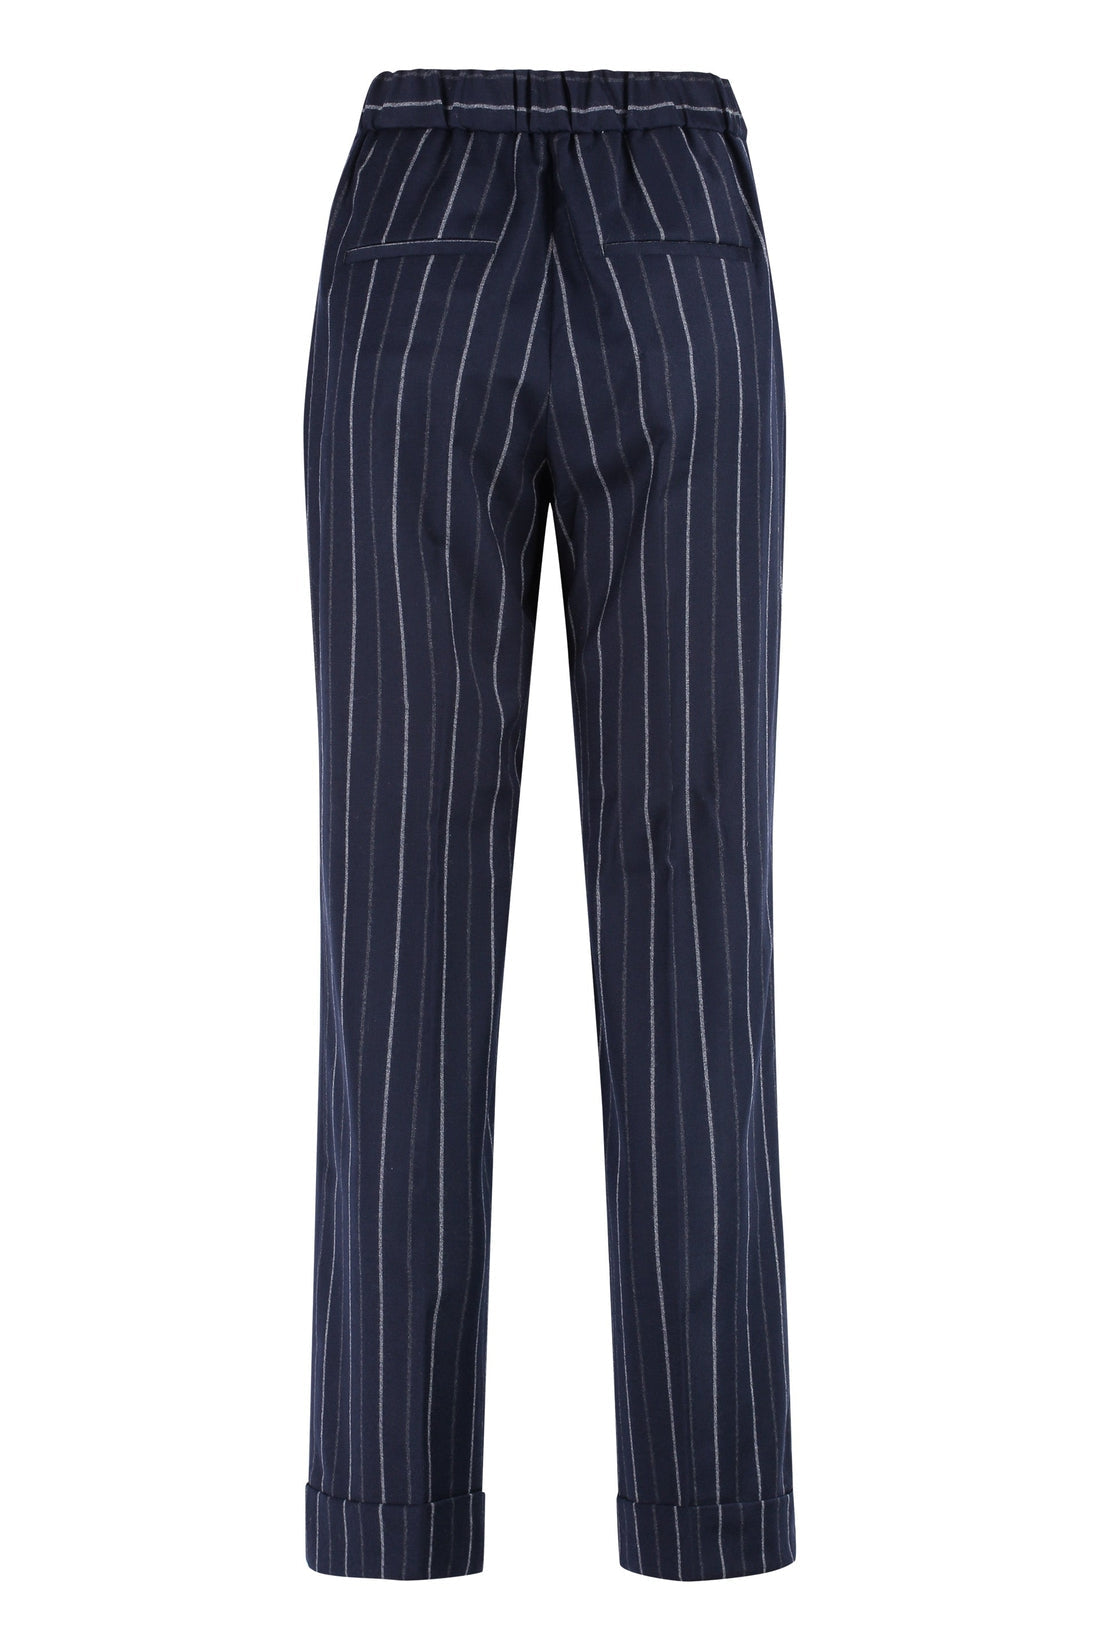 Peserico-OUTLET-SALE-Wool wide-leg trousers-ARCHIVIST